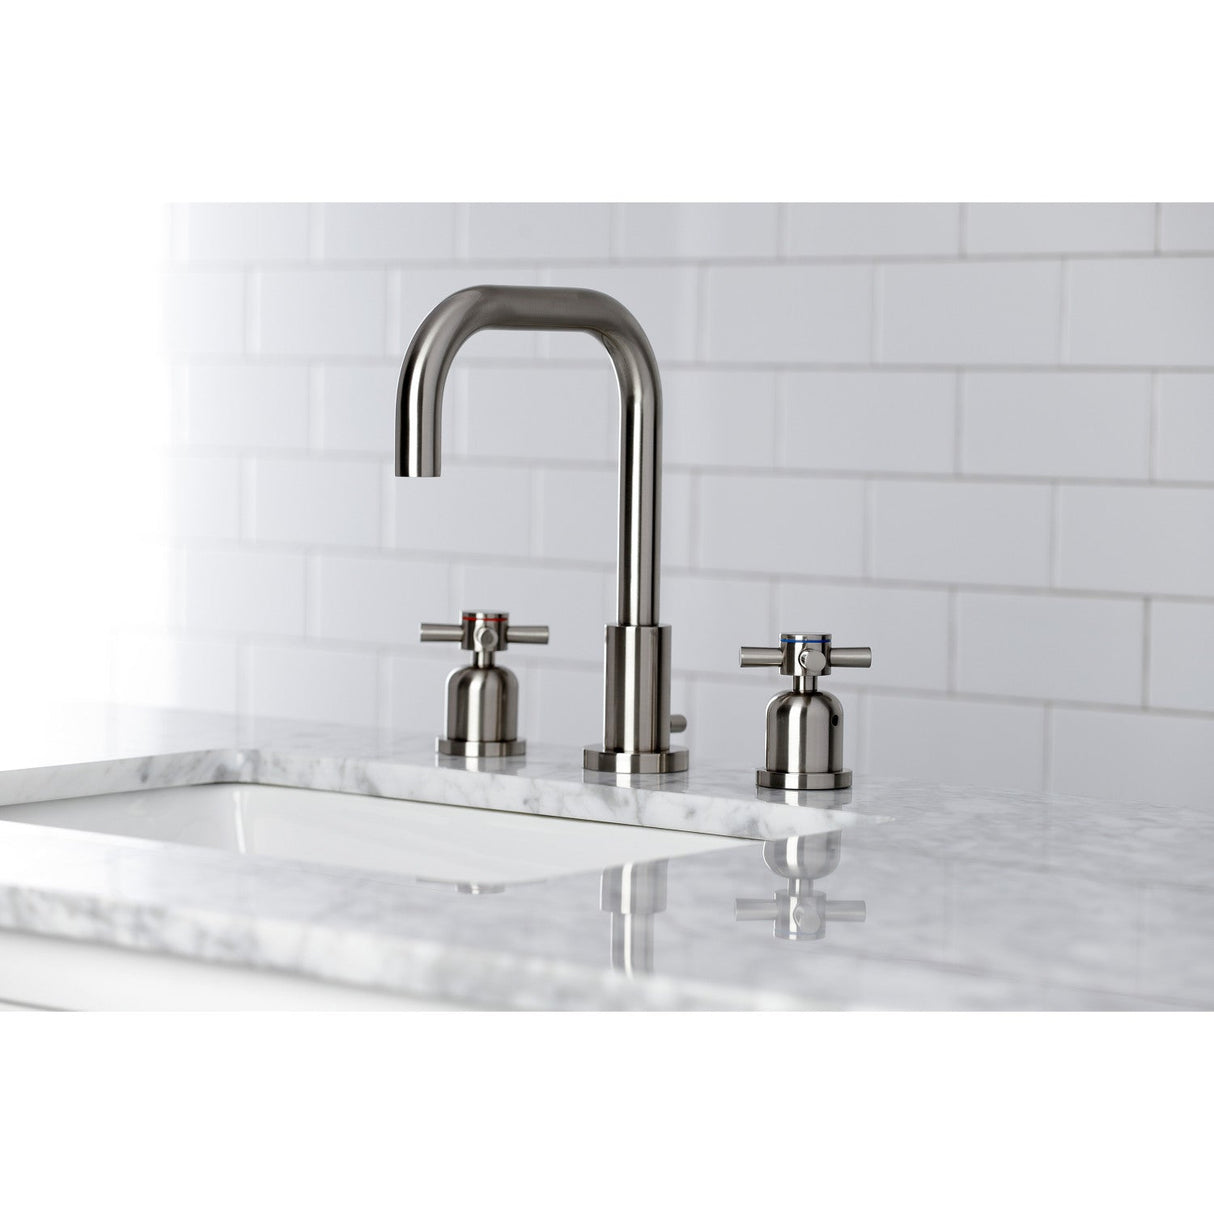 Concord FSC8938DX Two-Handle 3-Hole Deck Mount Widespread Bathroom Faucet with Pop-Up Drain, Brushed Nickel